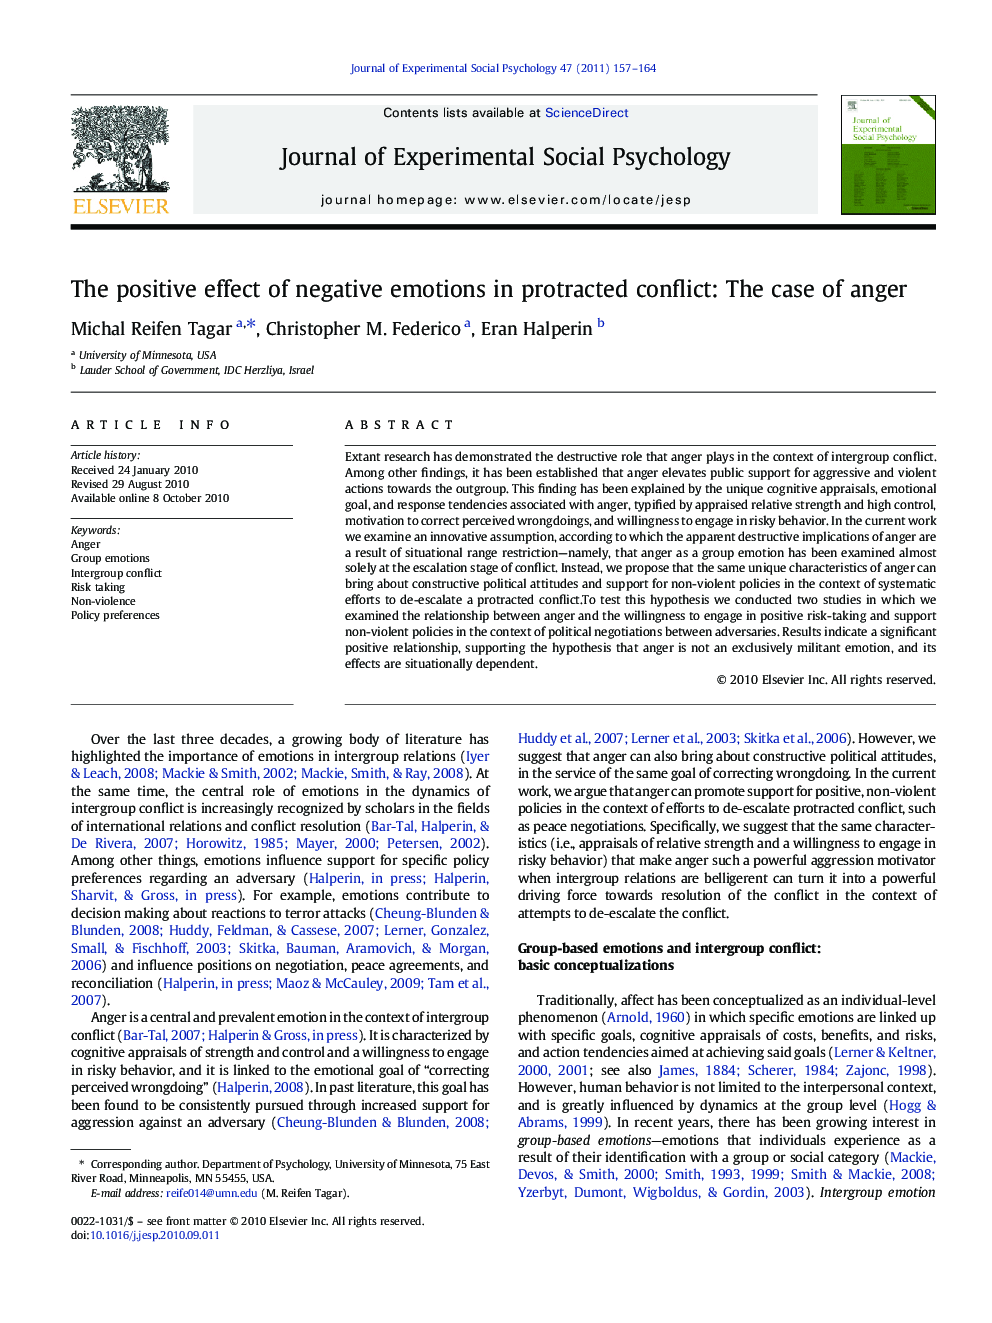 The positive effect of negative emotions in protracted conflict: The case of anger